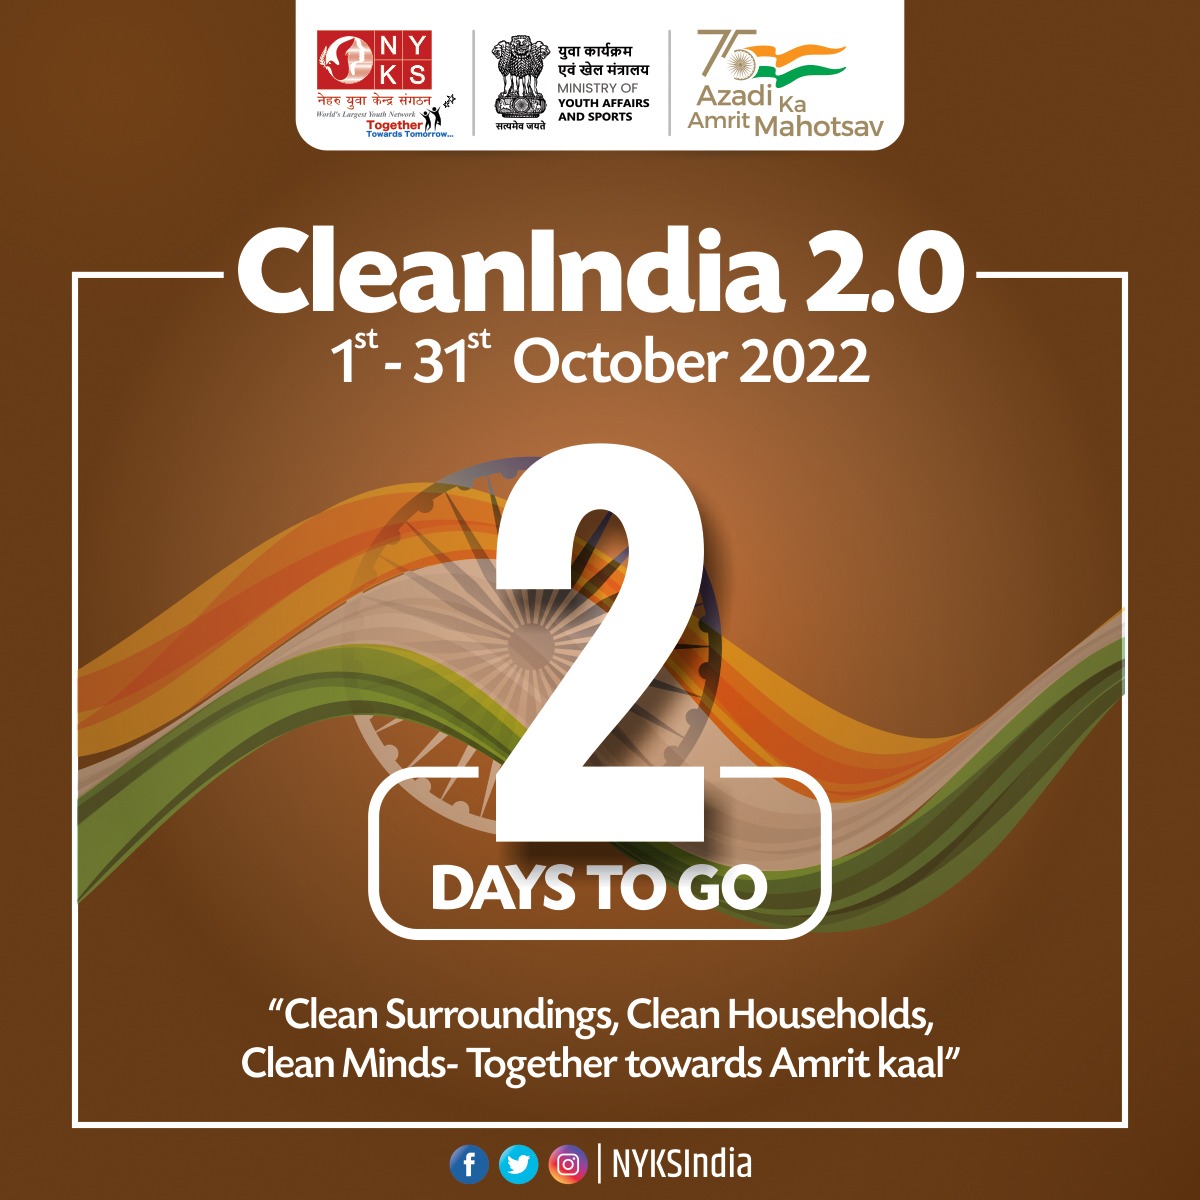 Countdown Start Now: 2 Days To Go. Begining of nationwide month-long #CleanIndia 2.0 Program. #letscleanindia #youth #SwachhBharat